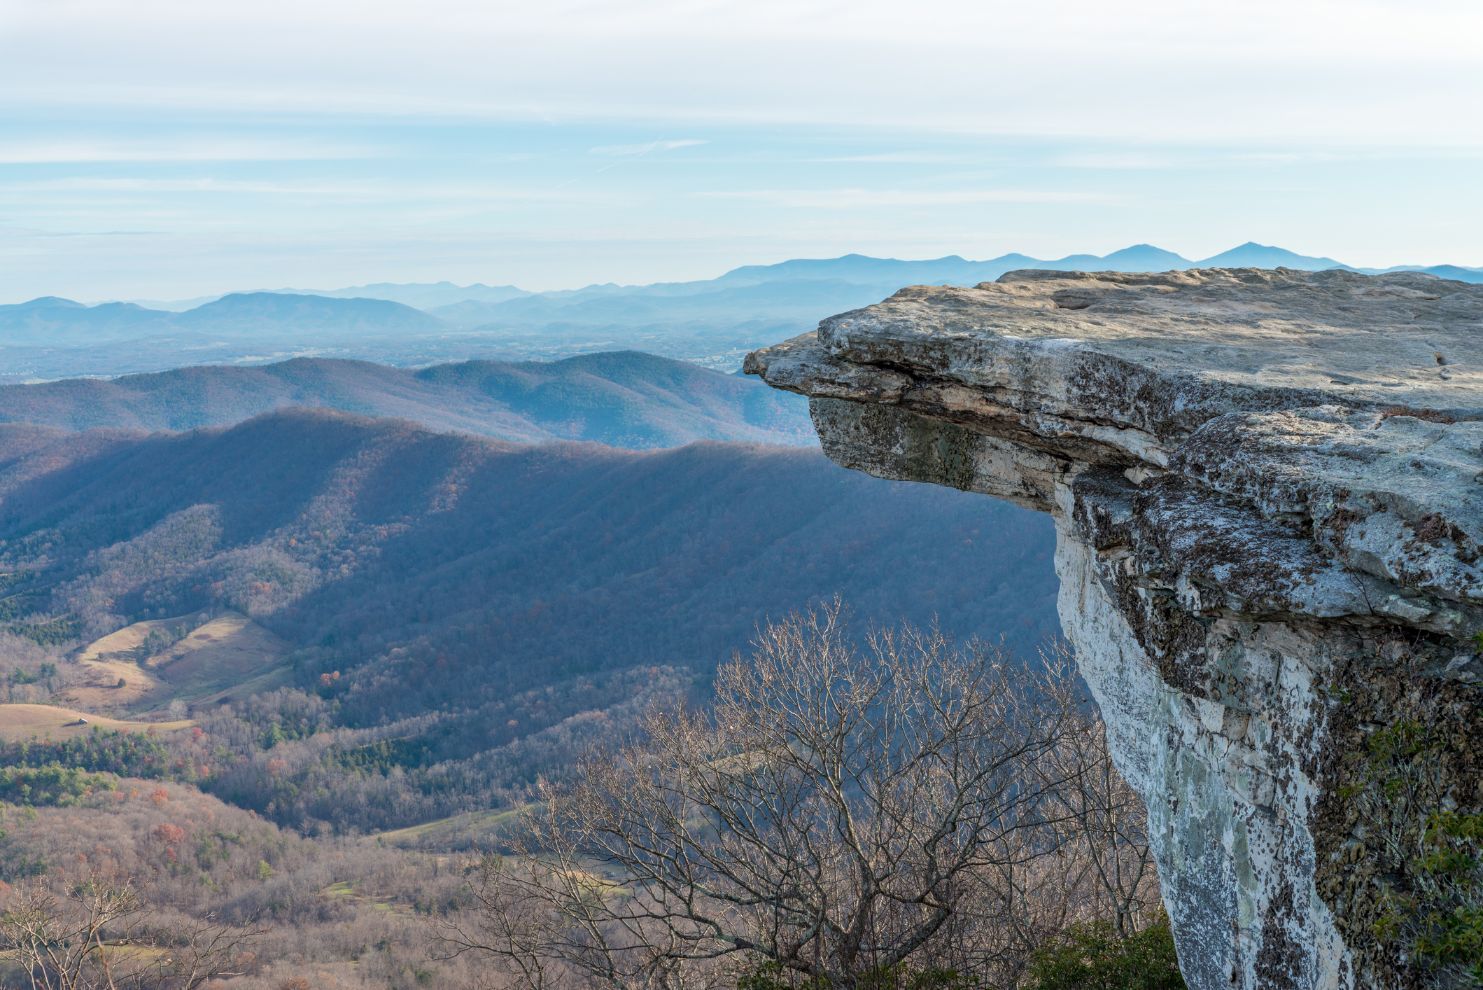 The remarkable viewpoint of McAfee Knob, located on the Catawba mountain in Virginia, on the Appalachian Trail